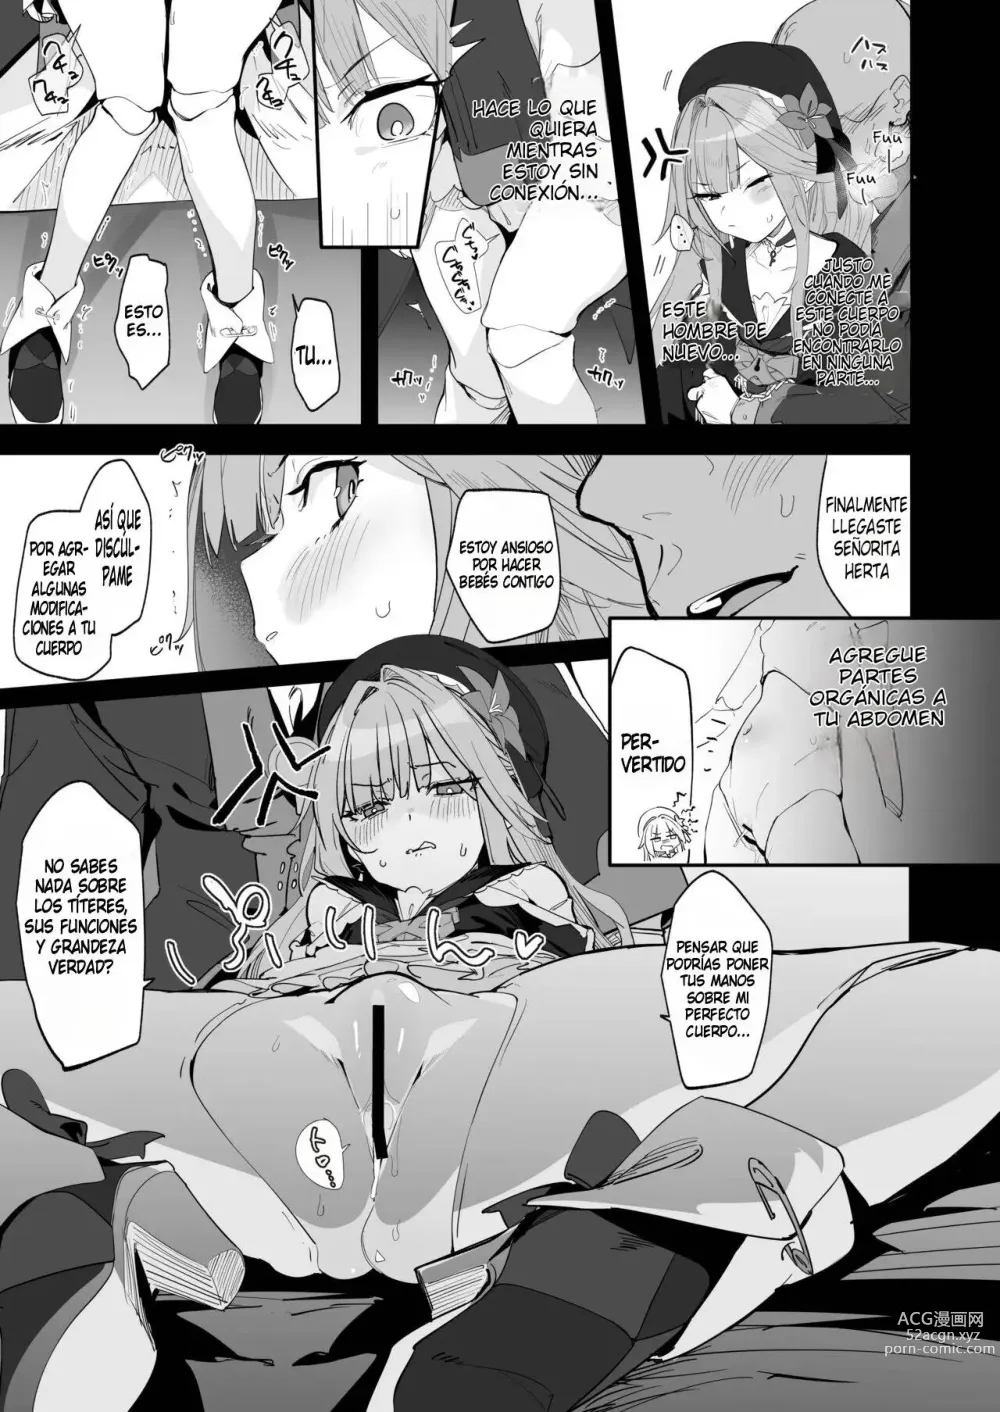 Page 2 of doujinshi The Story Where Madame Herta’s Perfection Goes POOF!